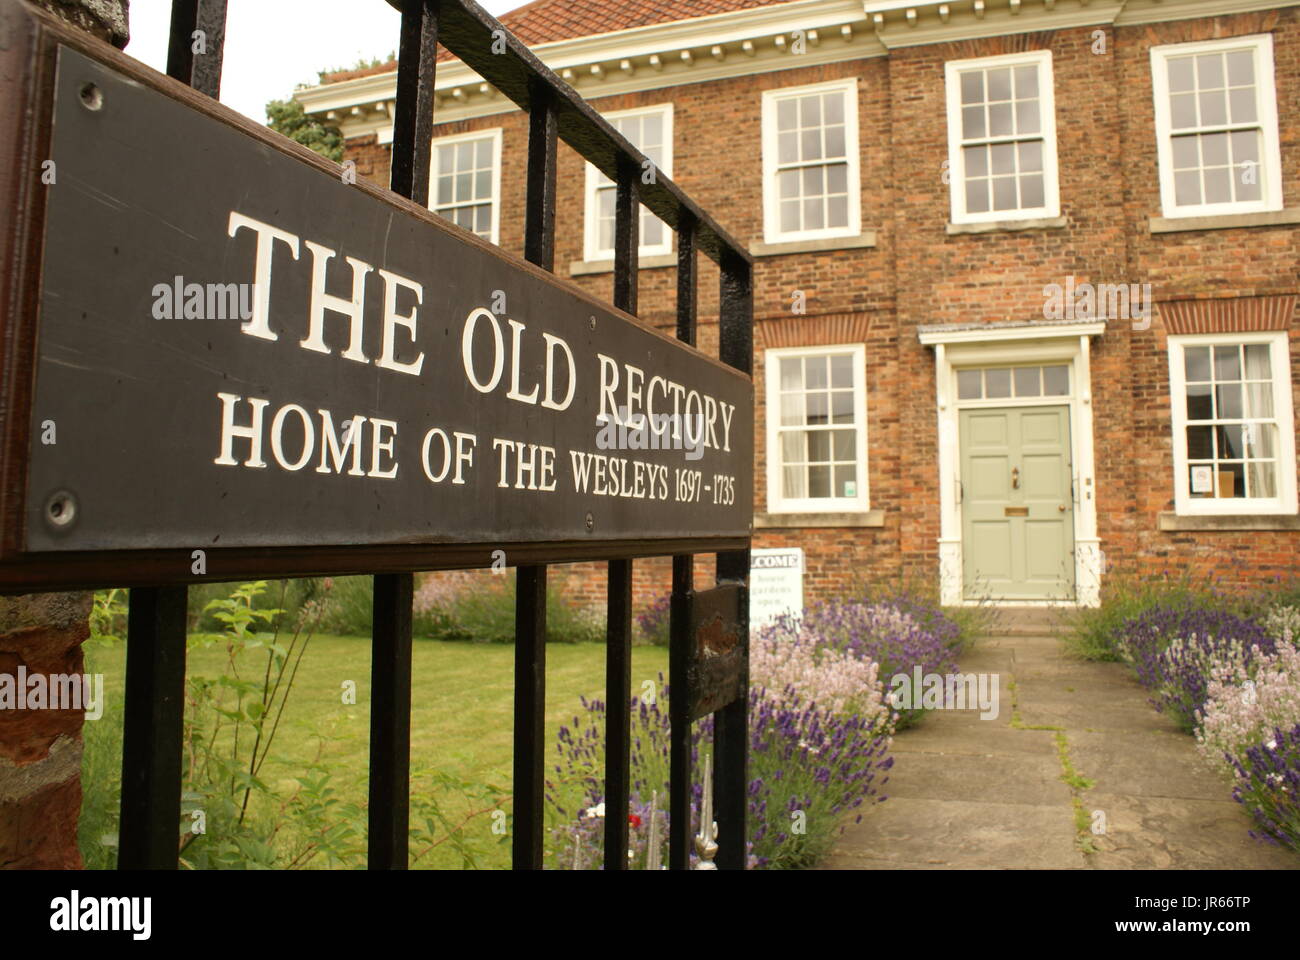 Old Rectory, Epworth, Lincolnshire Stock Photo